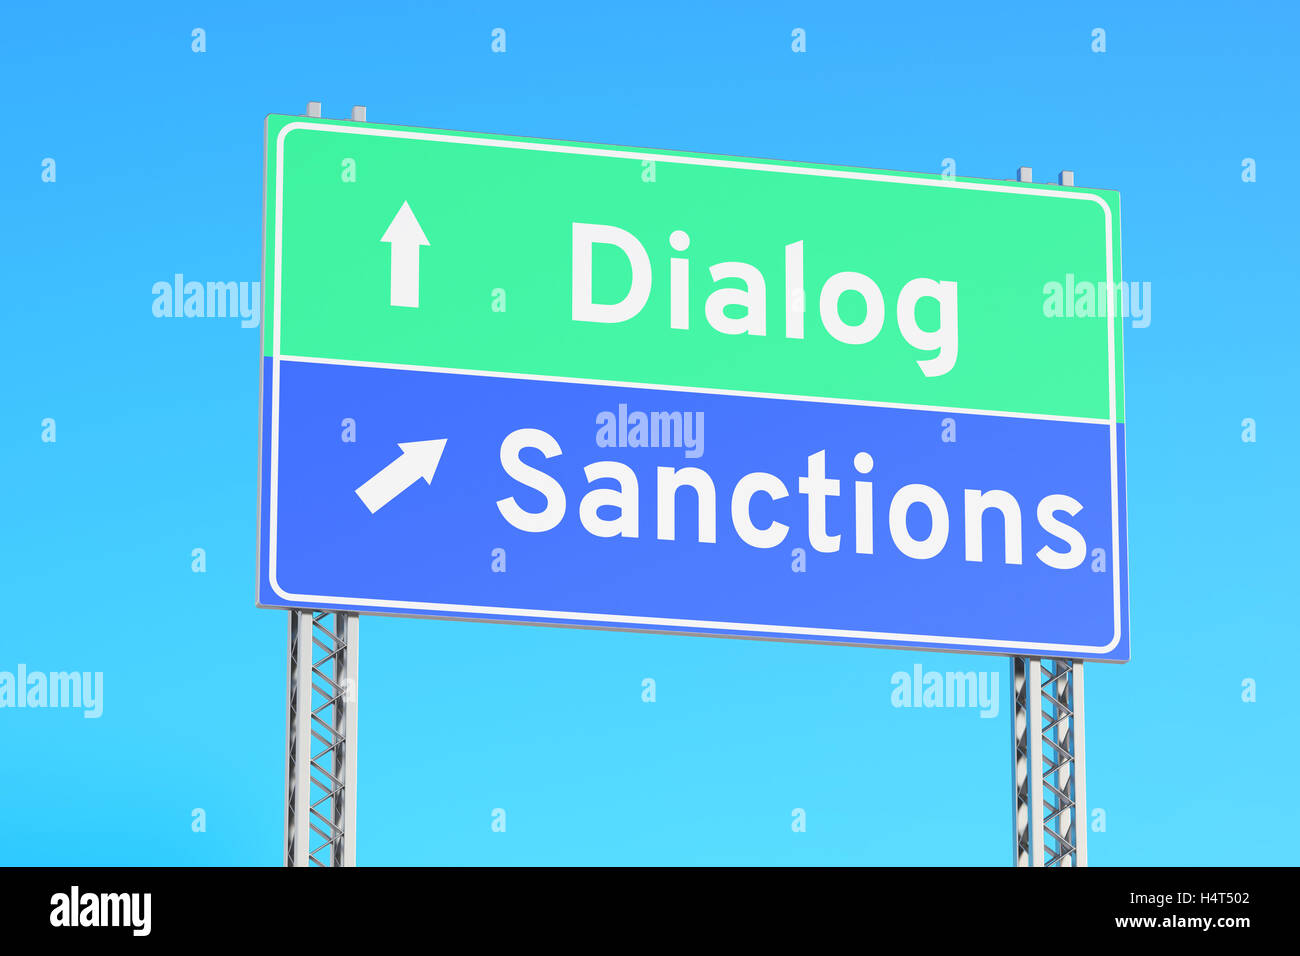 sanctions or dialog green road signs, 3D rendering Stock Photo